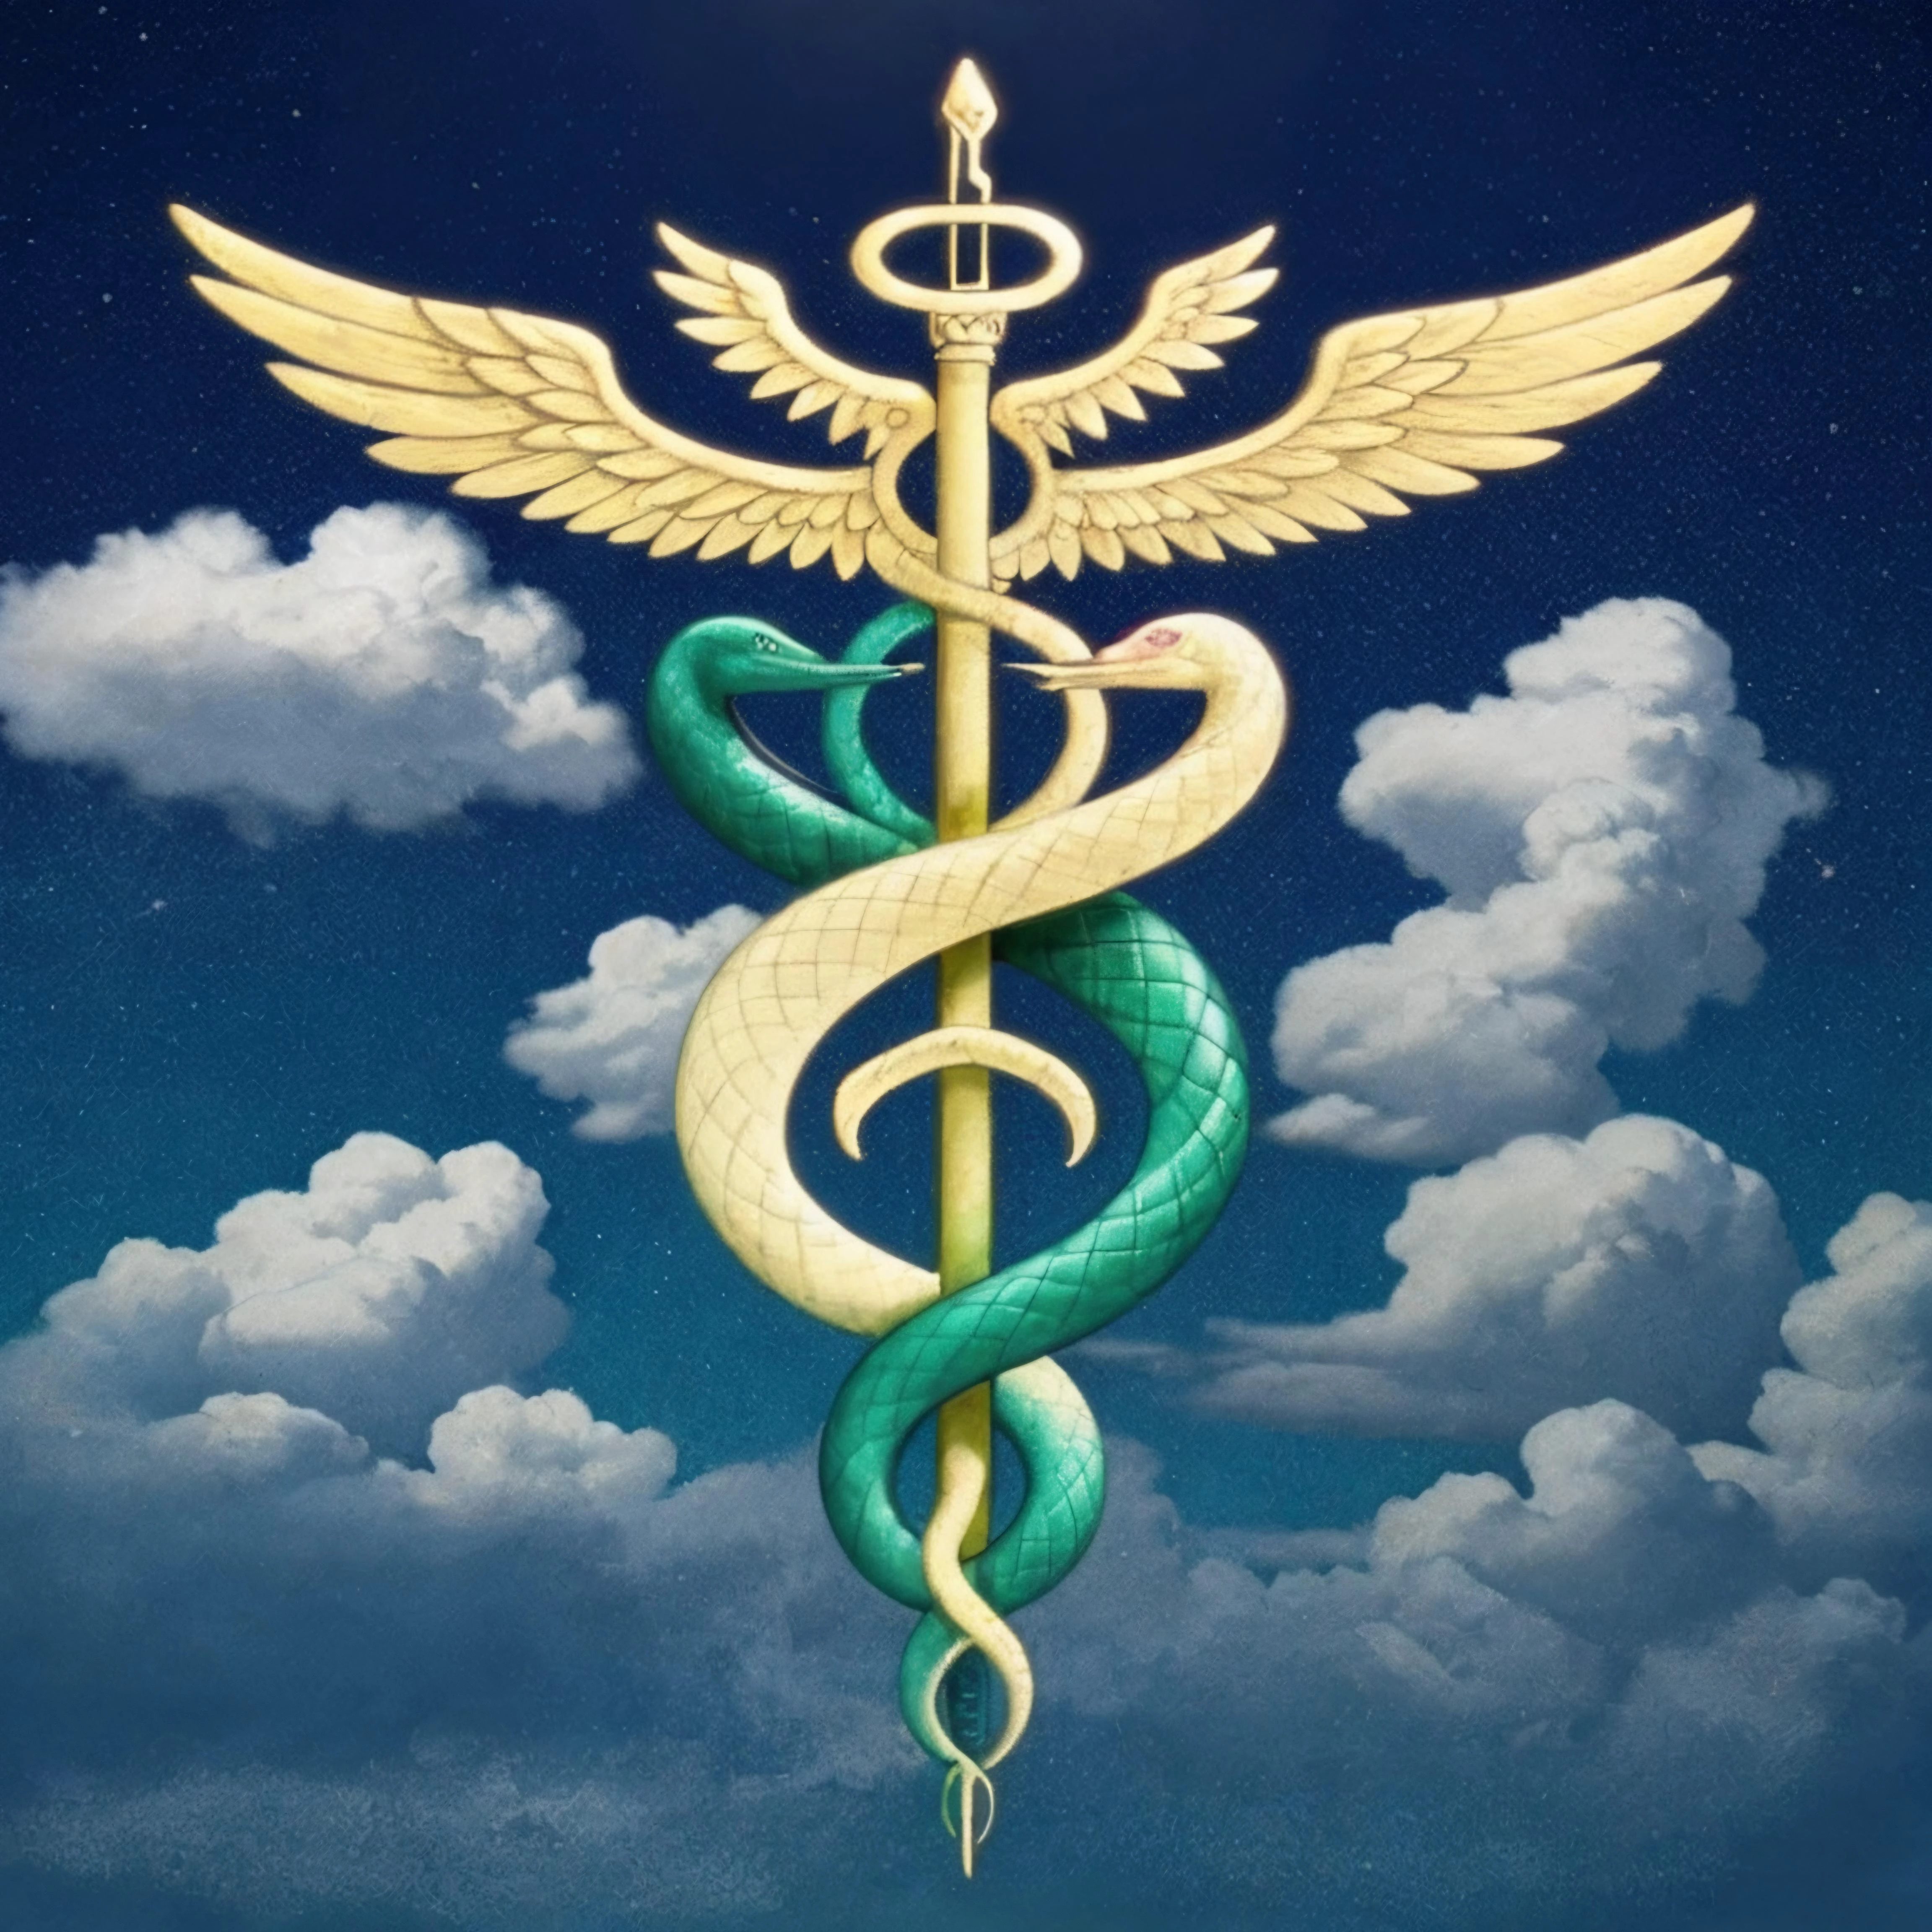 color,(Caduceus:1.2), symbol, mystic, symbol in the air, celestial, sky, clouds, two snakes entwined in the staff, 